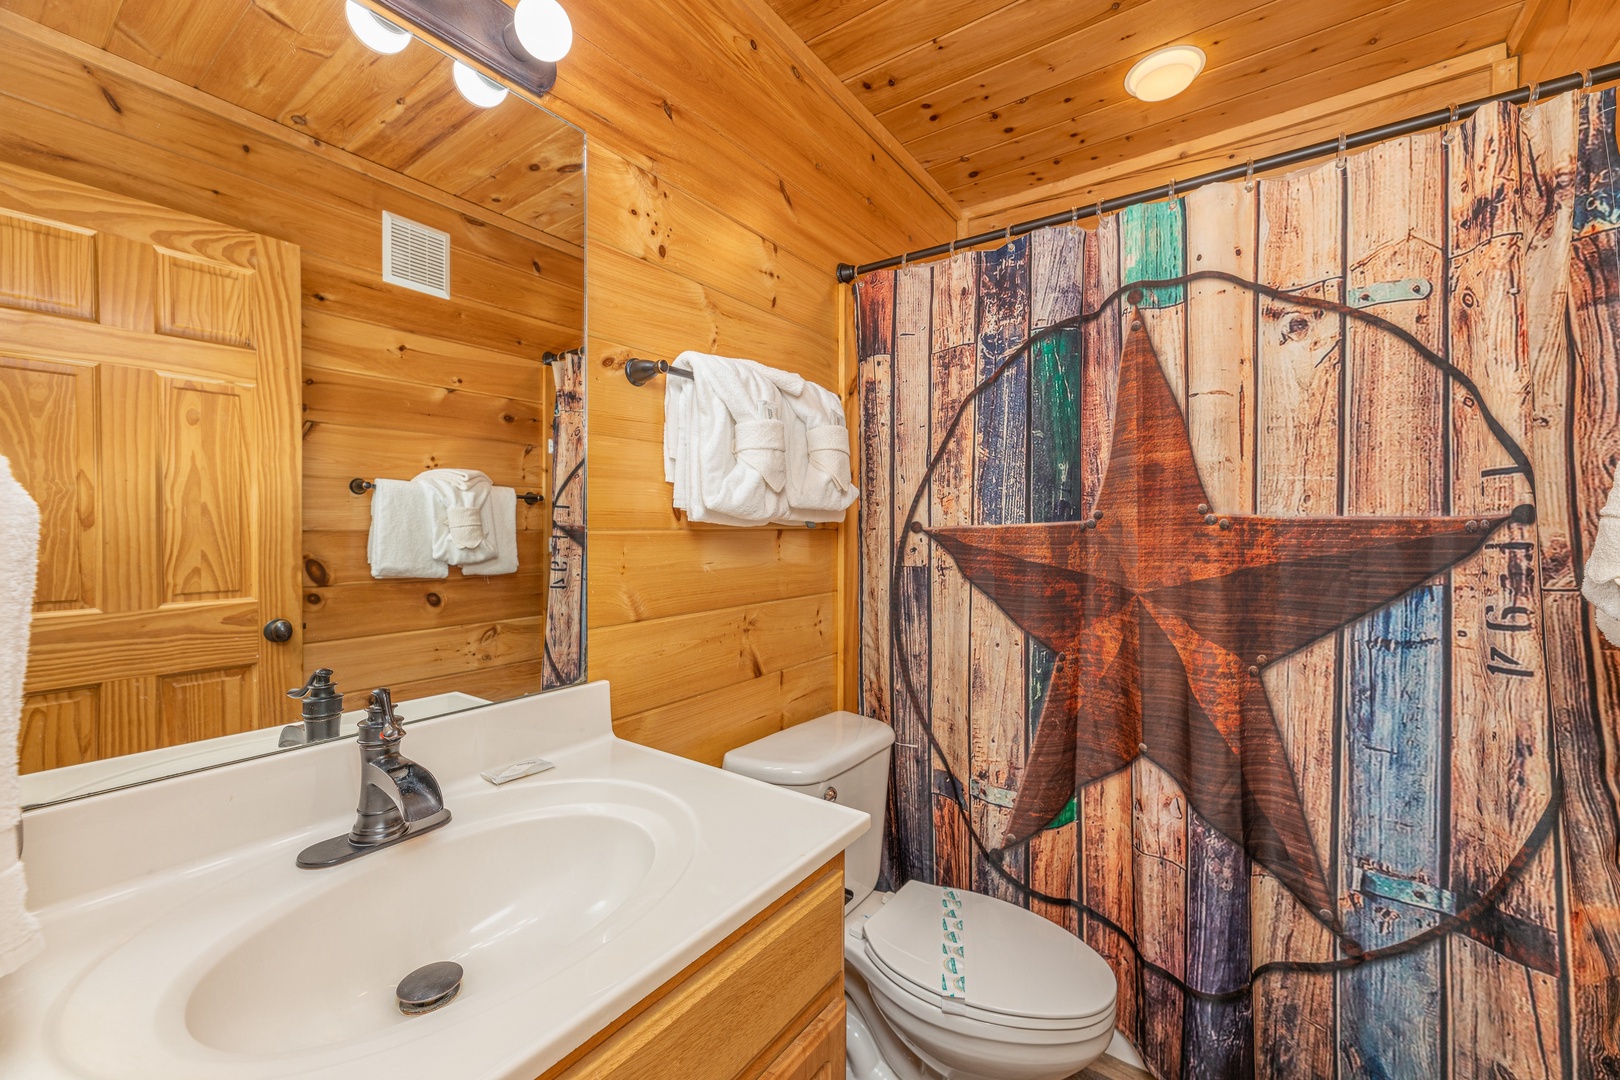 Bathroom with tub and shower at Loving Every Minute, a 5 bedroom cabin rental located in Pigeon Forge